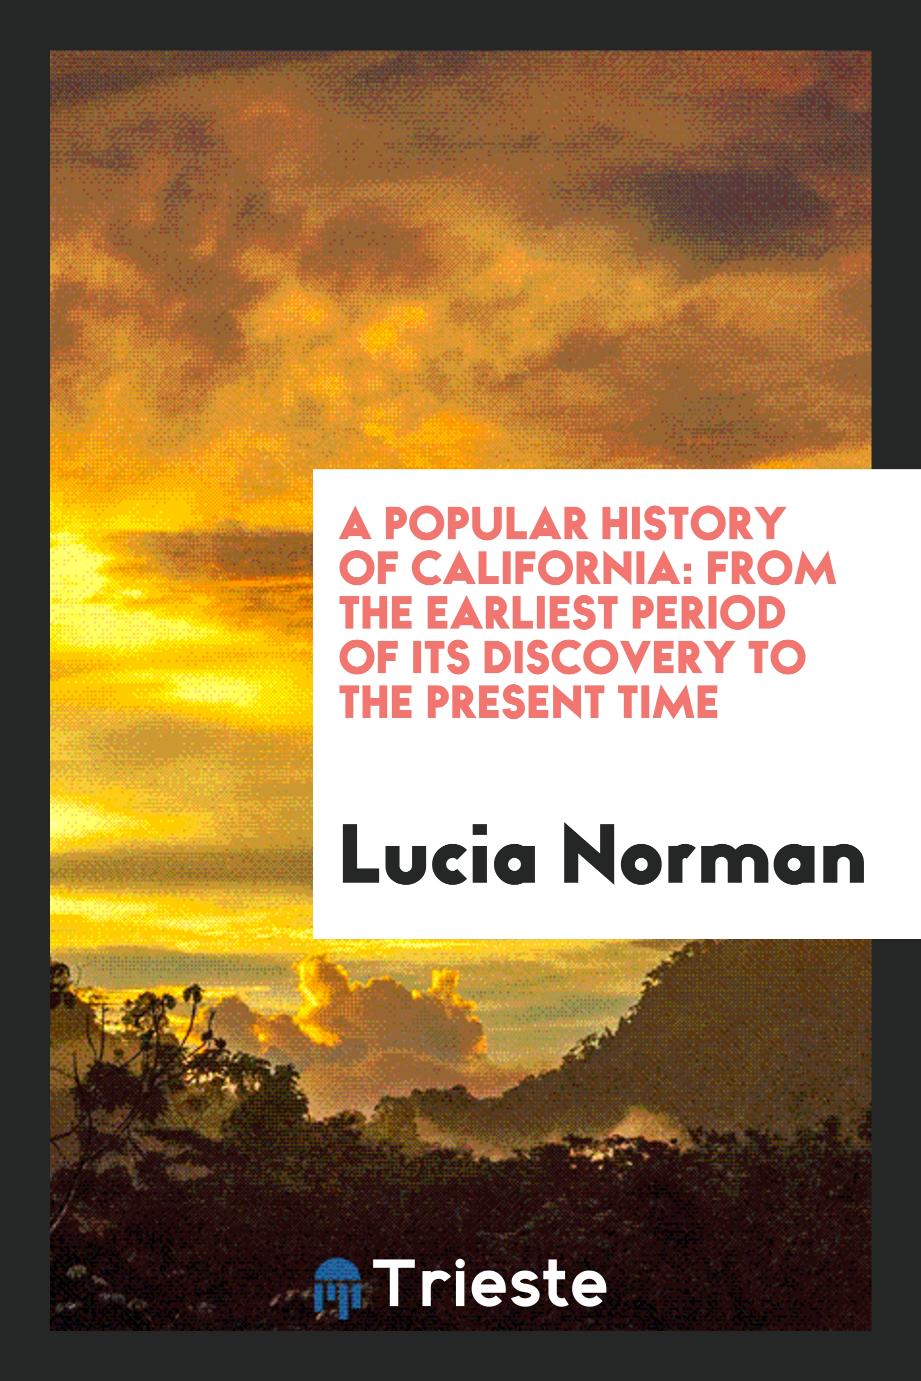 A popular history of California: from the earliest period of its discovery to the present time